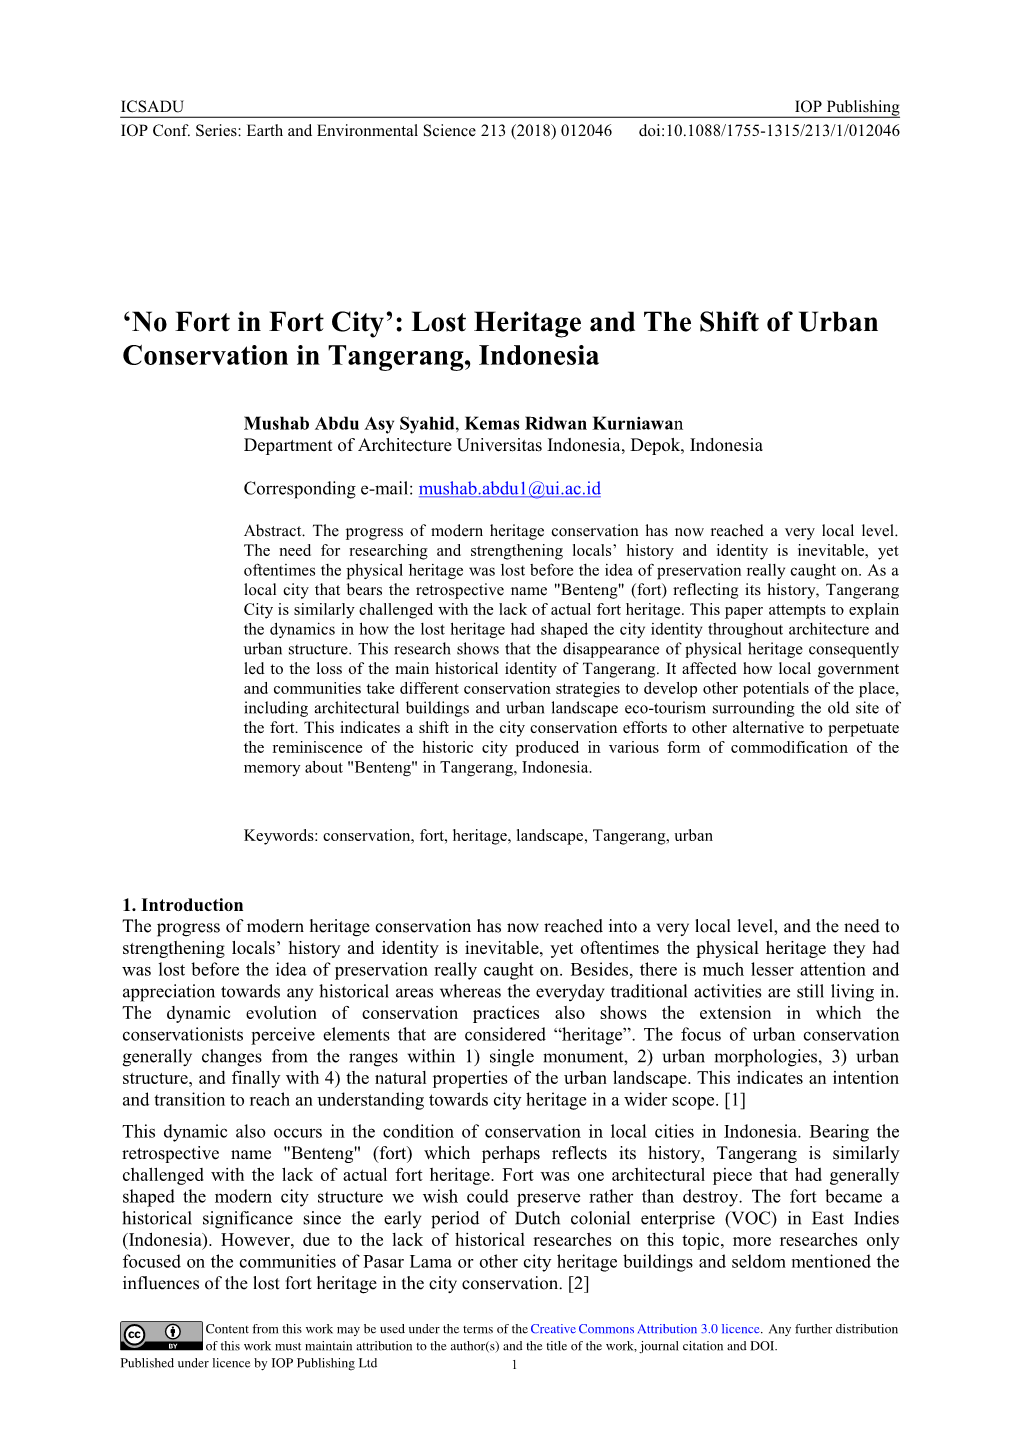 Lost Heritage and the Shift of Urban Conservation in Tangerang, Indonesia